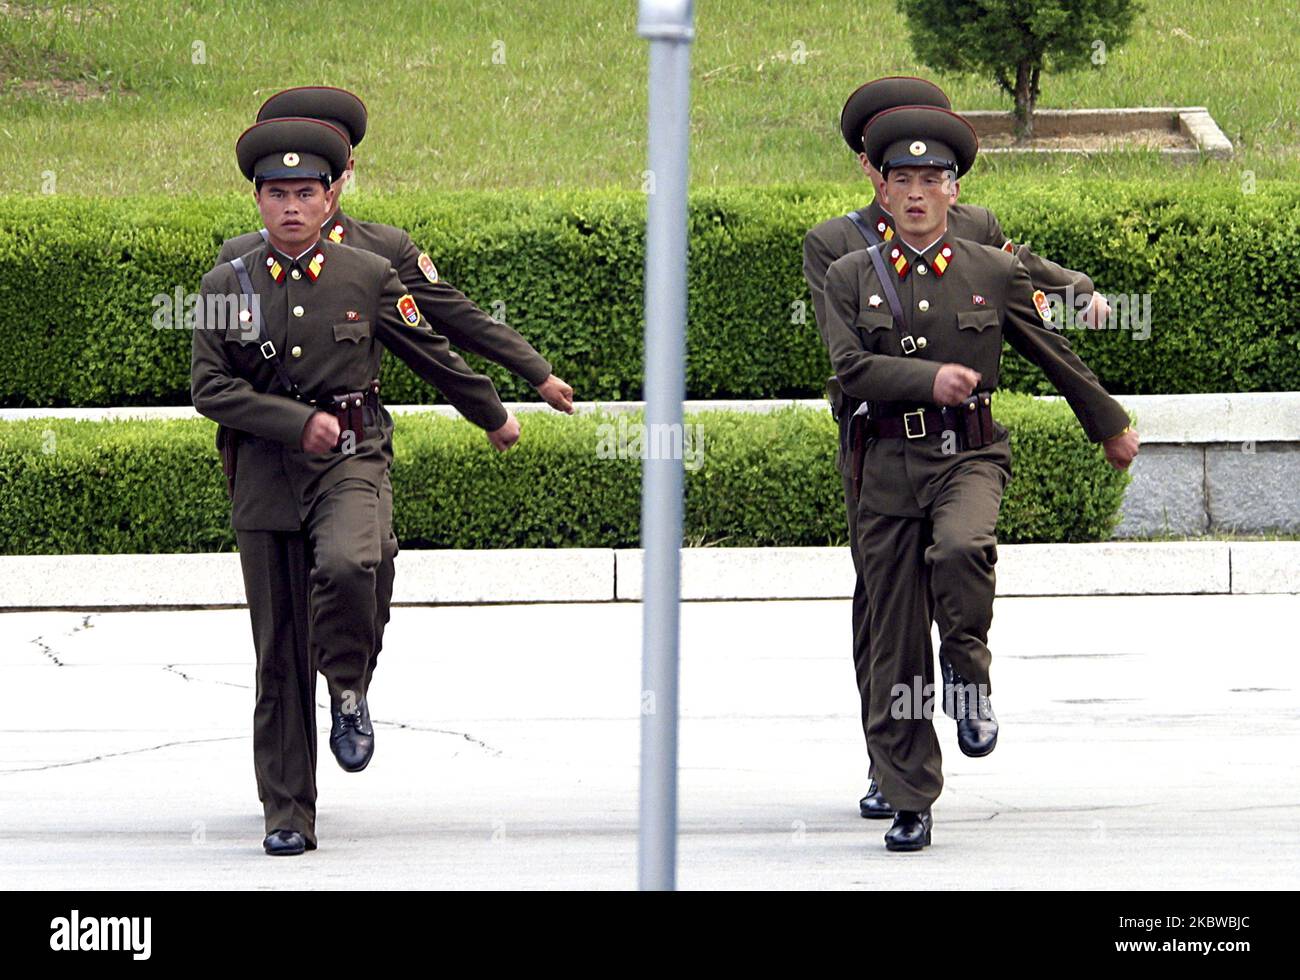 May 20, 2003-Paju, South Korea-North Korean soldiers react for shift change at Panmunjom in Paju, South Korea. (Photo by Seung-il Ryu/NurPhoto) Stock Photo